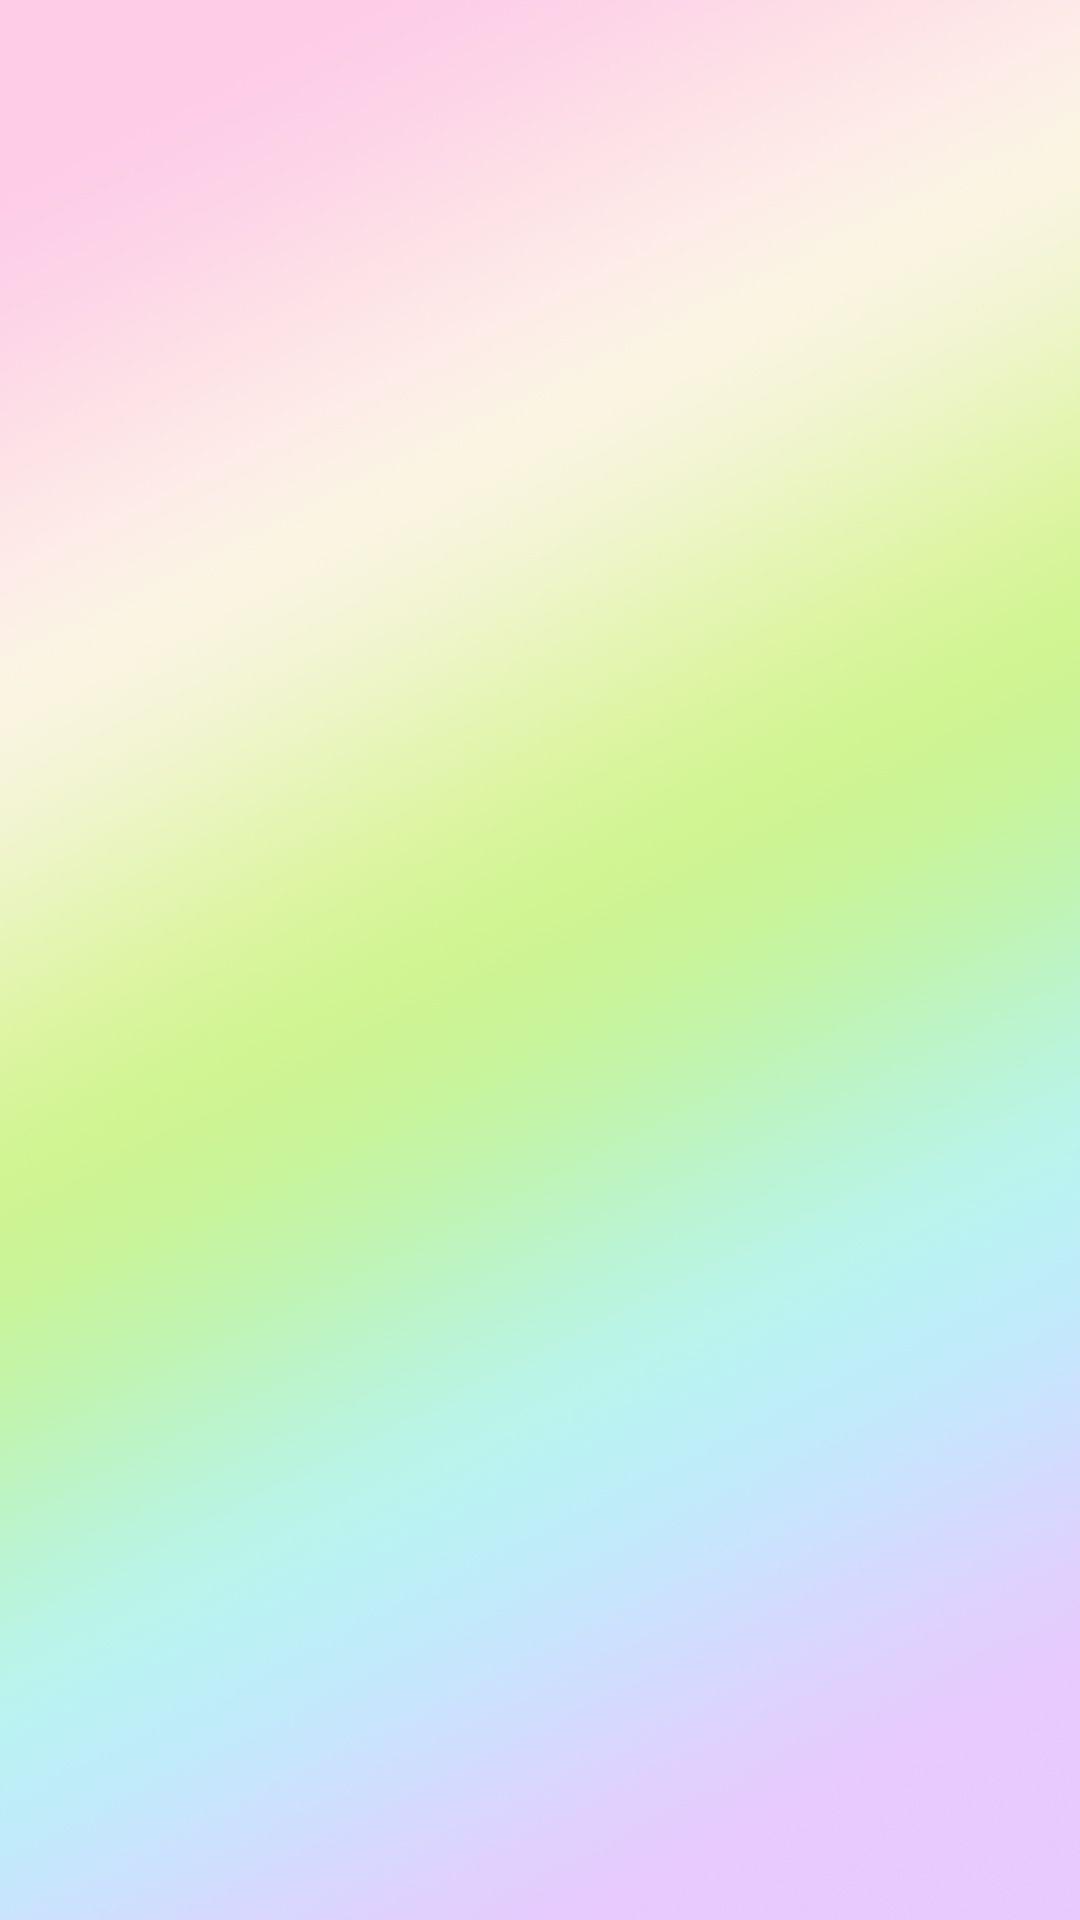 75 Aesthetic Pastel wallpapers for iPhone - miss mv